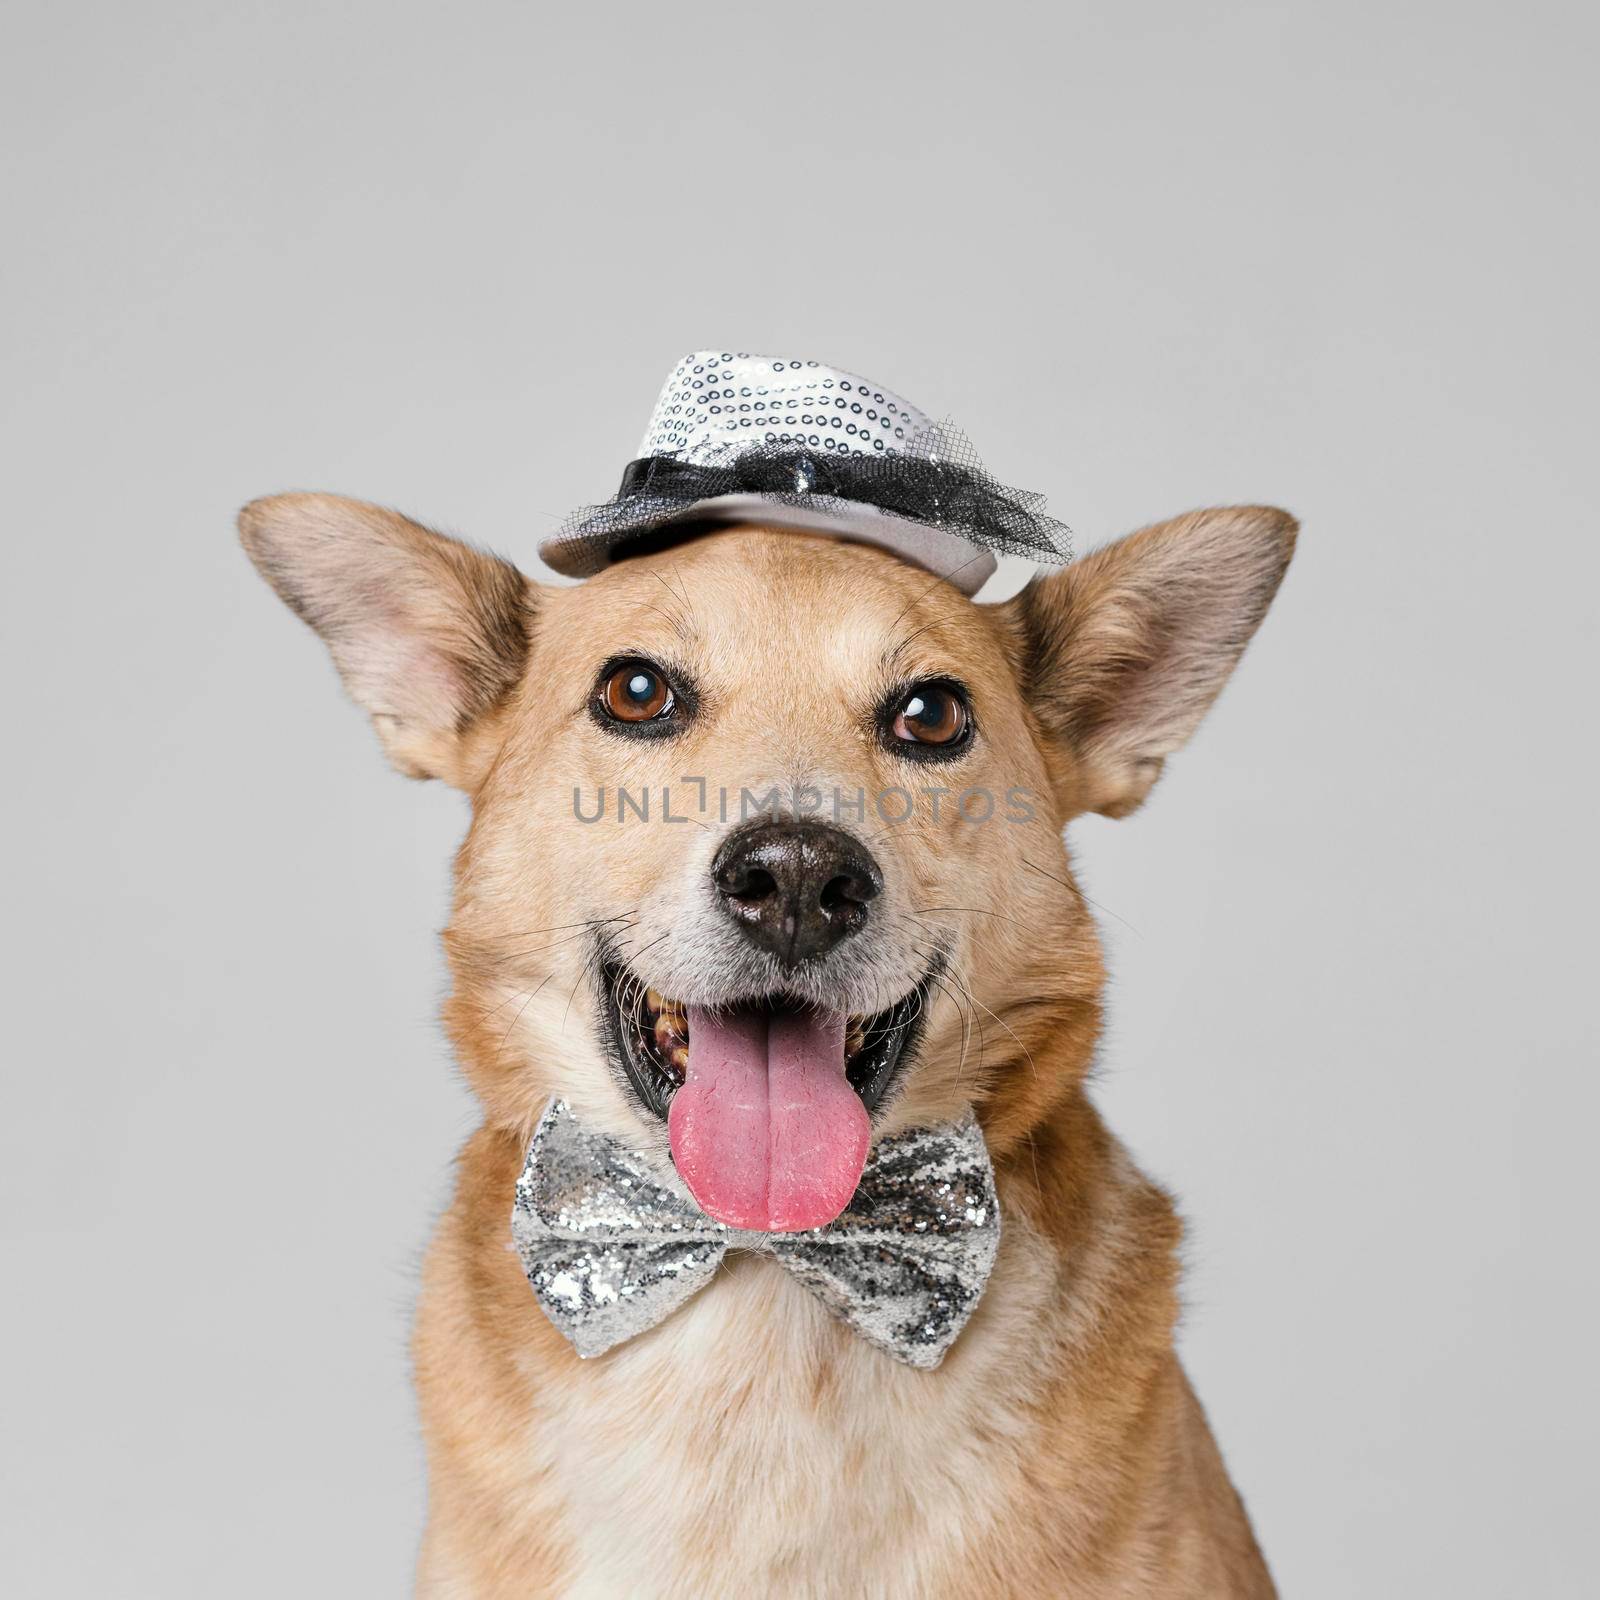 cute dog wearing hat bow tie. High quality photo by Zahard